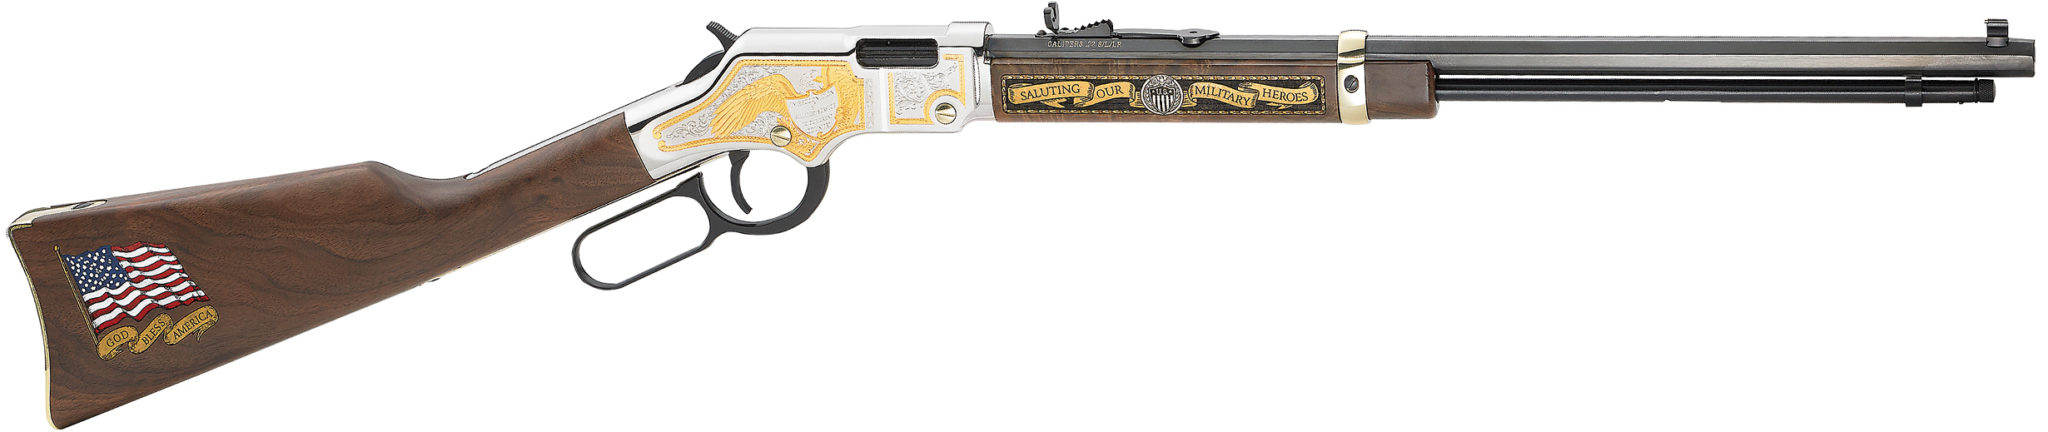 HENRY REPEATING ARMS - GOLDEN BOY MILITARY SERVICE TRIBUTE 22 LR